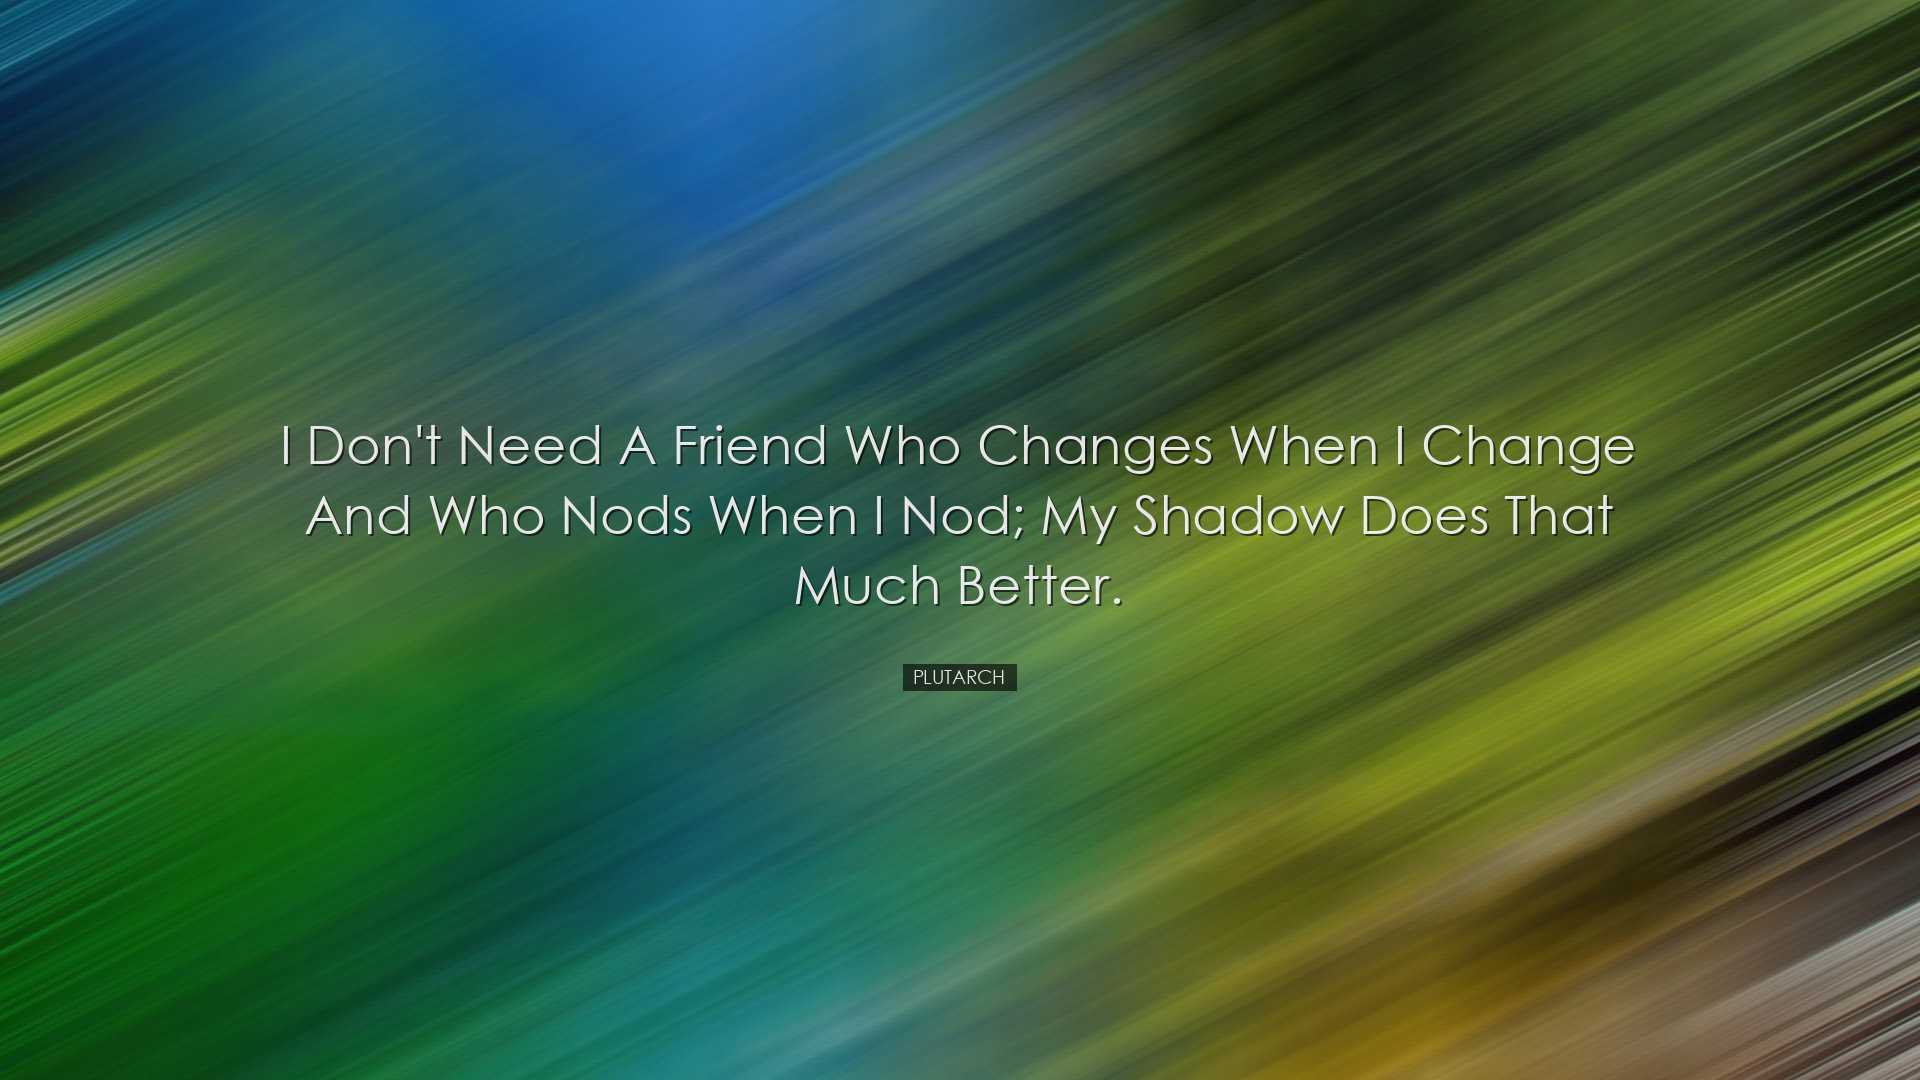 I don't need a friend who changes when I change and who nods when